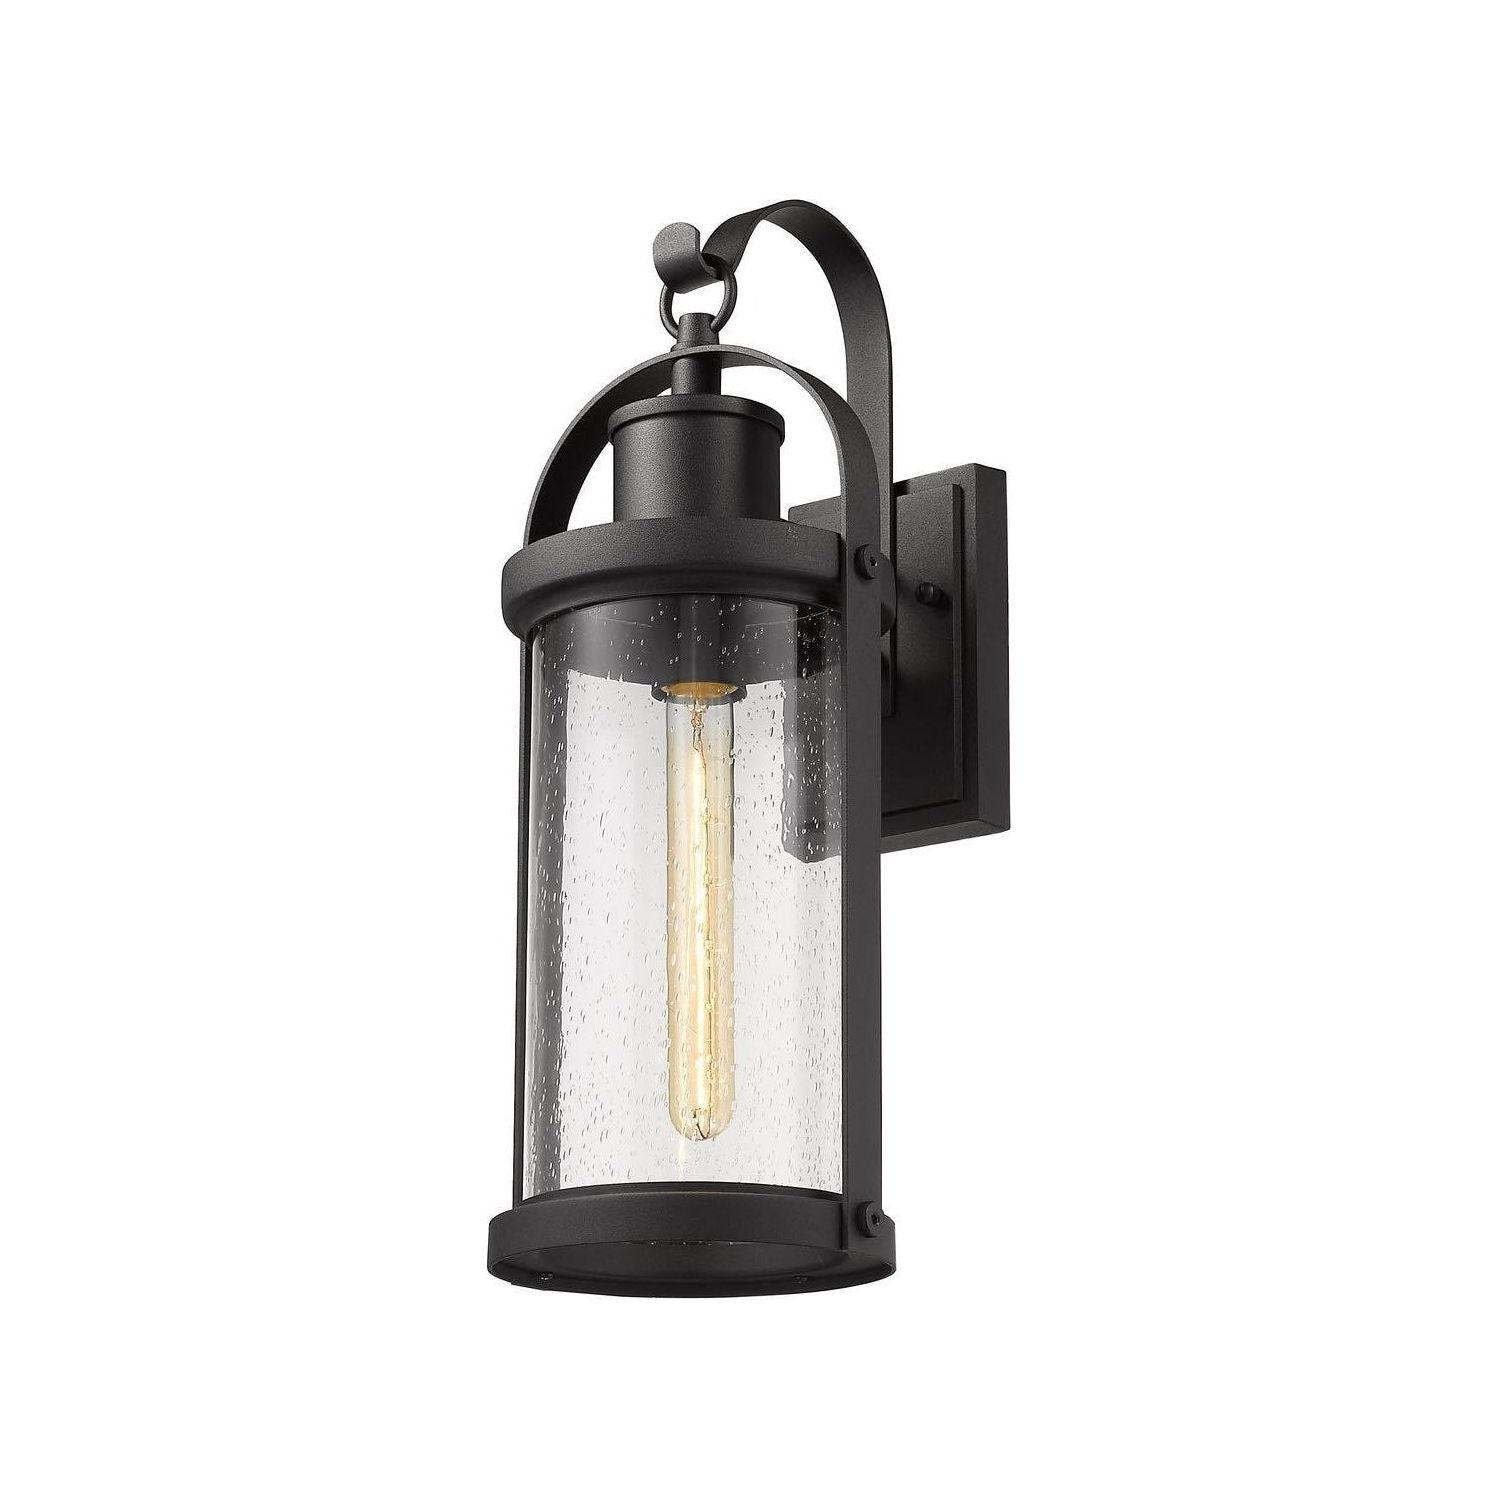 Z-Lite - Roundhouse Outdoor Wall Light - Lights Canada